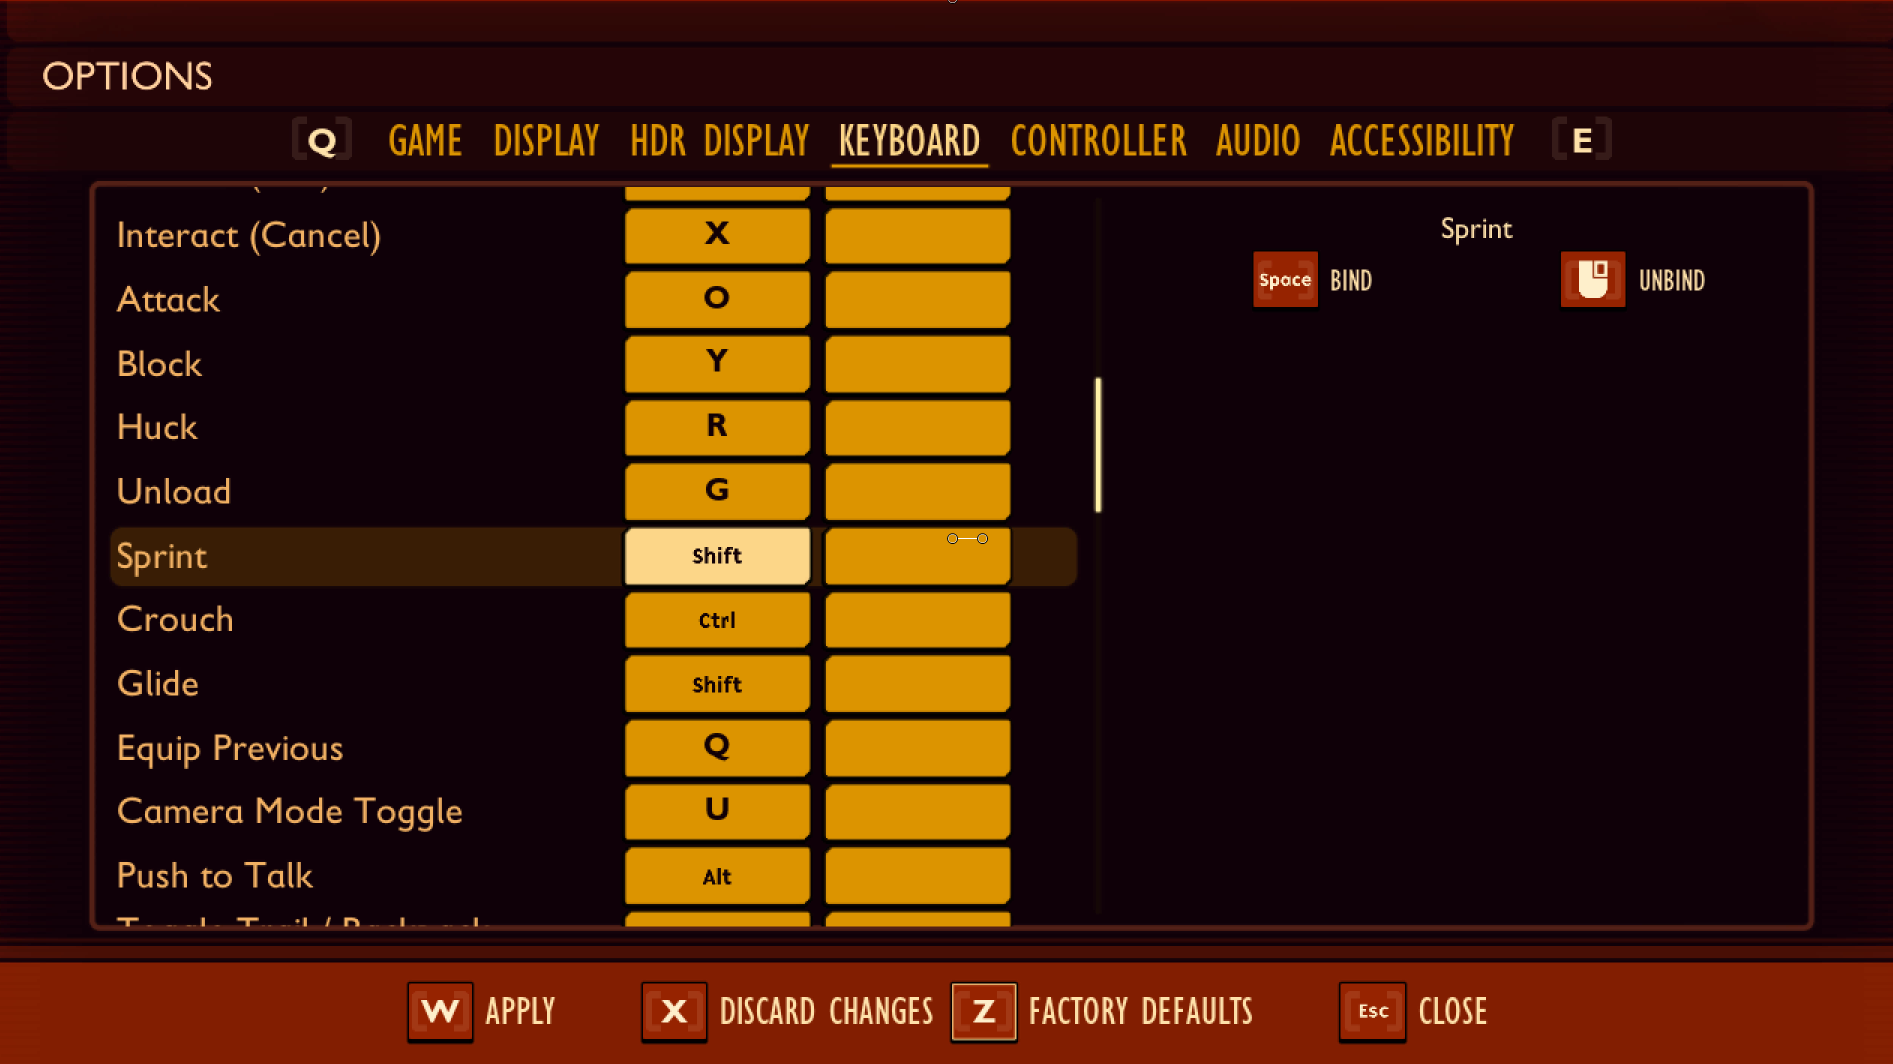 A screenshot from Grounded, displaying the "Options" menu. The "Keyboard" tab is selected, and "Sprint" is highlighted.